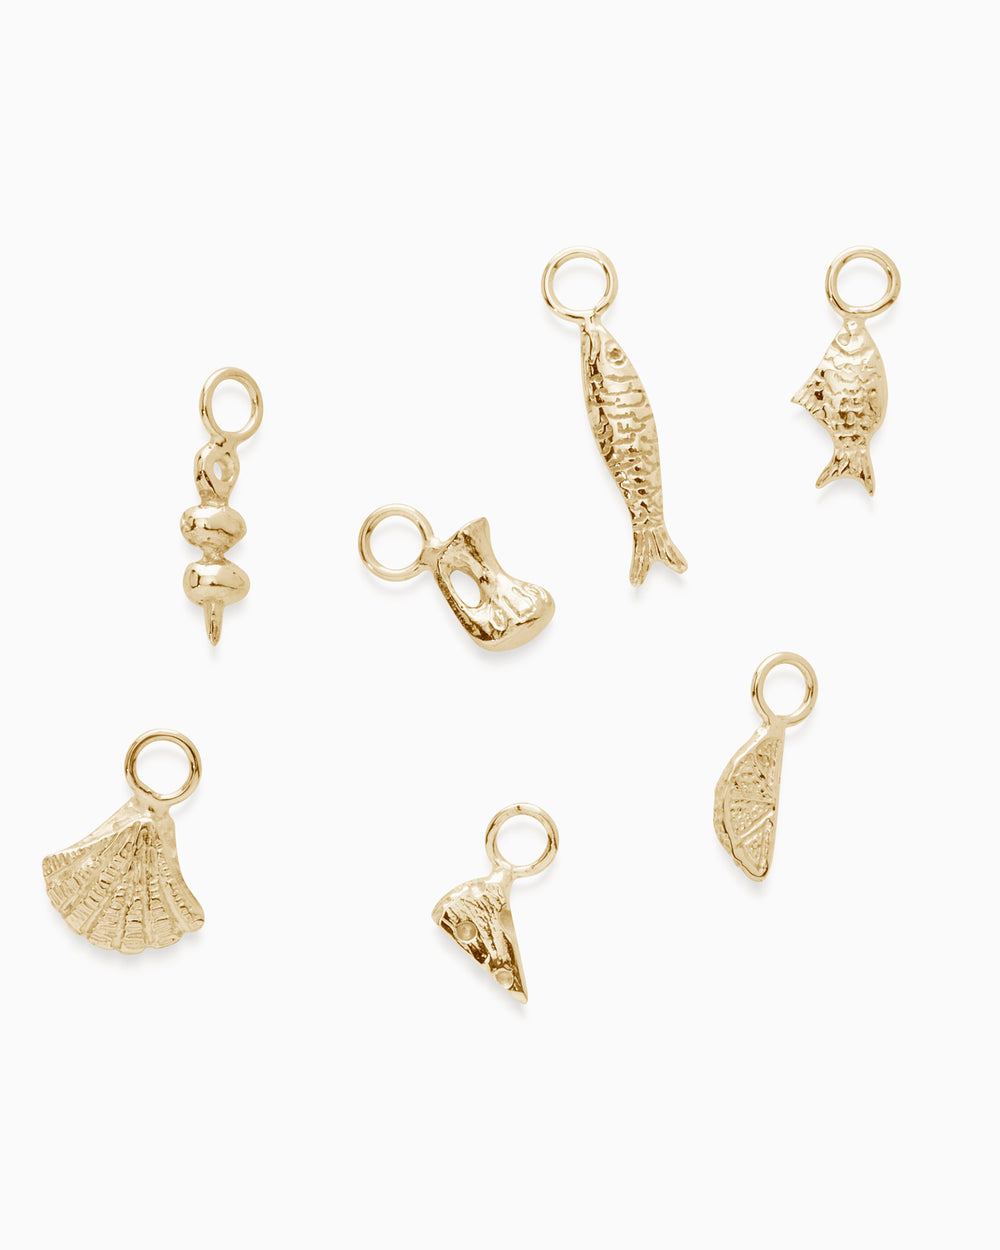 Olive Earring | Gold